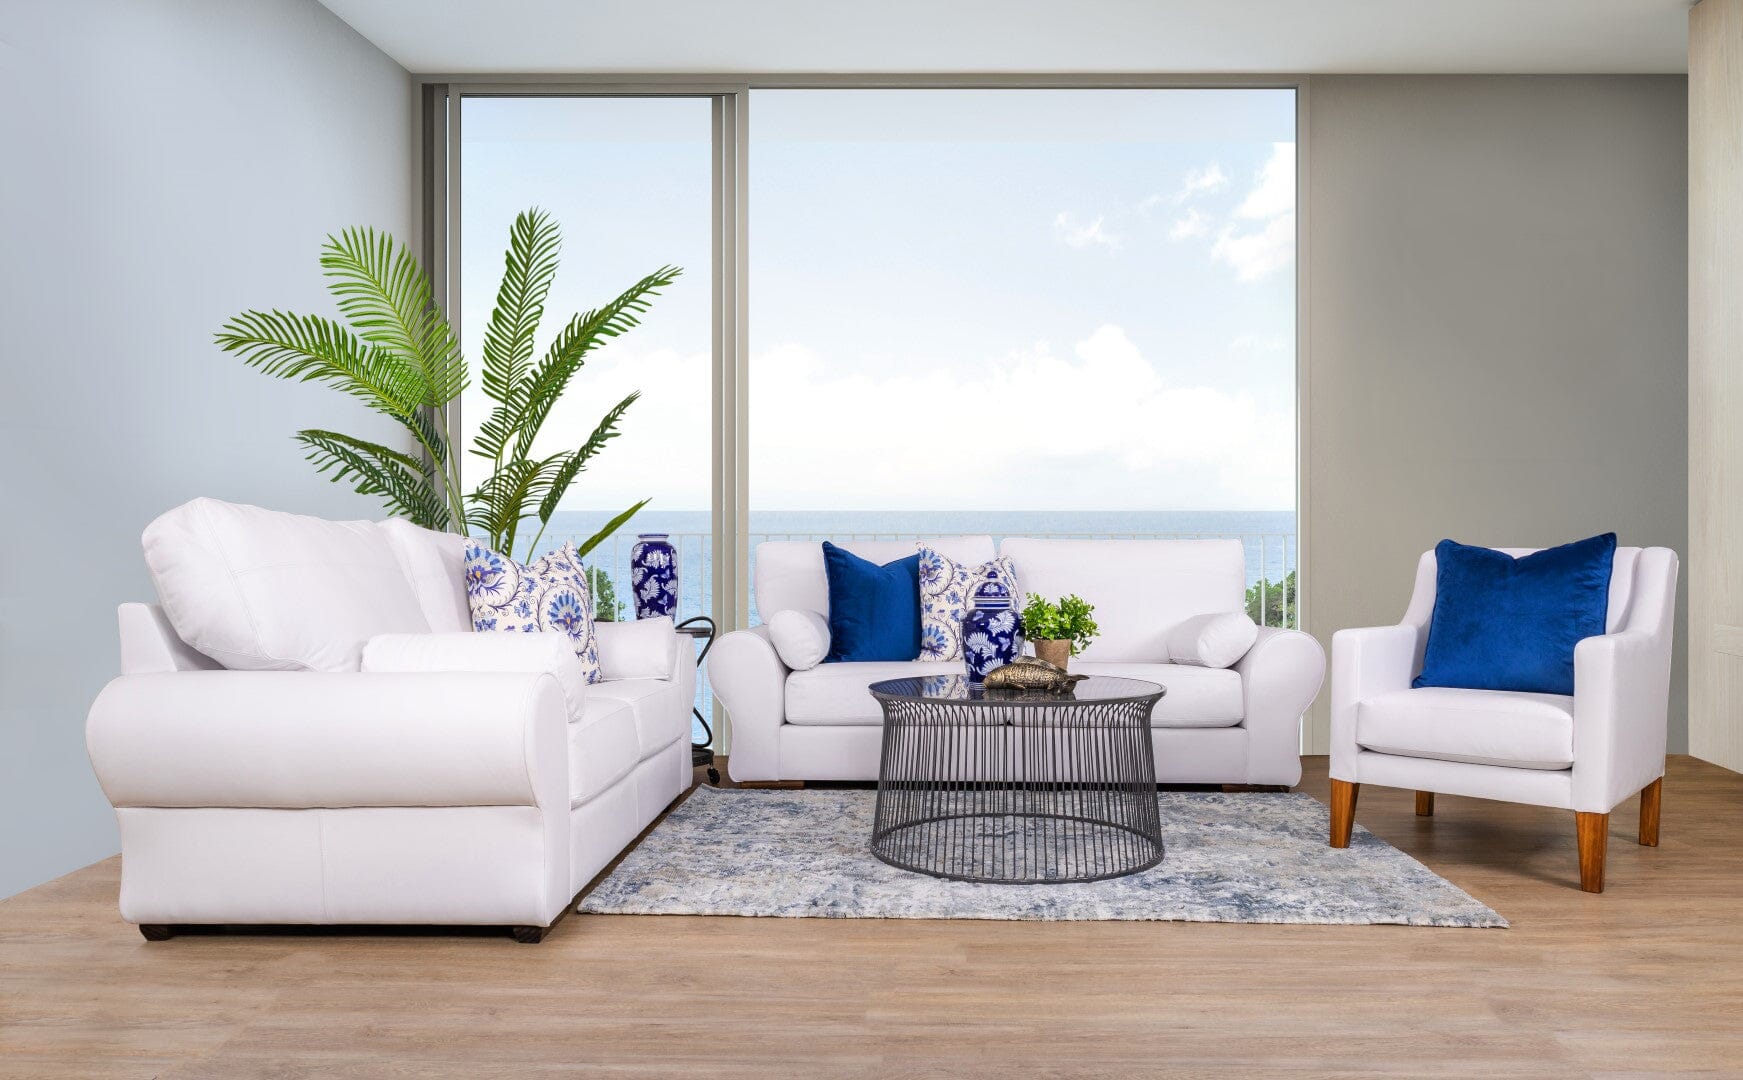 Tips for Furnishing and Maintaining a Coastal Home: Choosing Practical and Stylish Furniture, Adding Coastal Décor, and Caring for Leather Furniture in a Saltwater Environment.